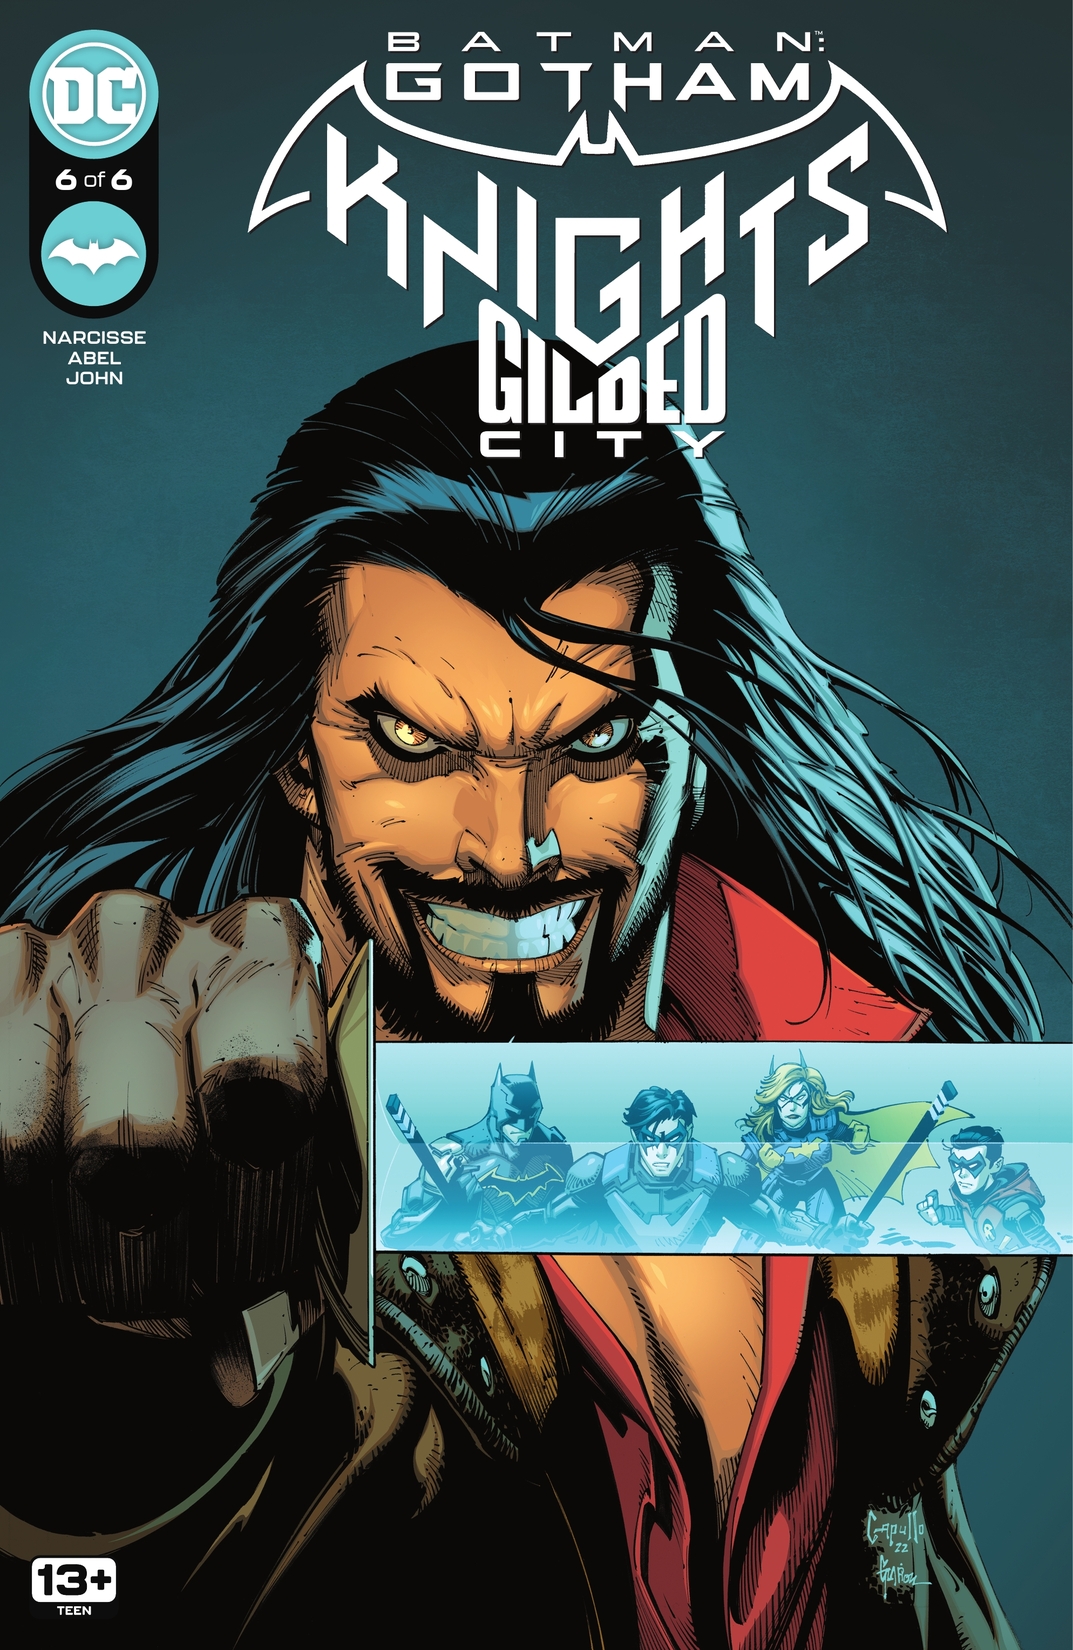 Batman: Gotham Knights – Gilded City #6 preview images